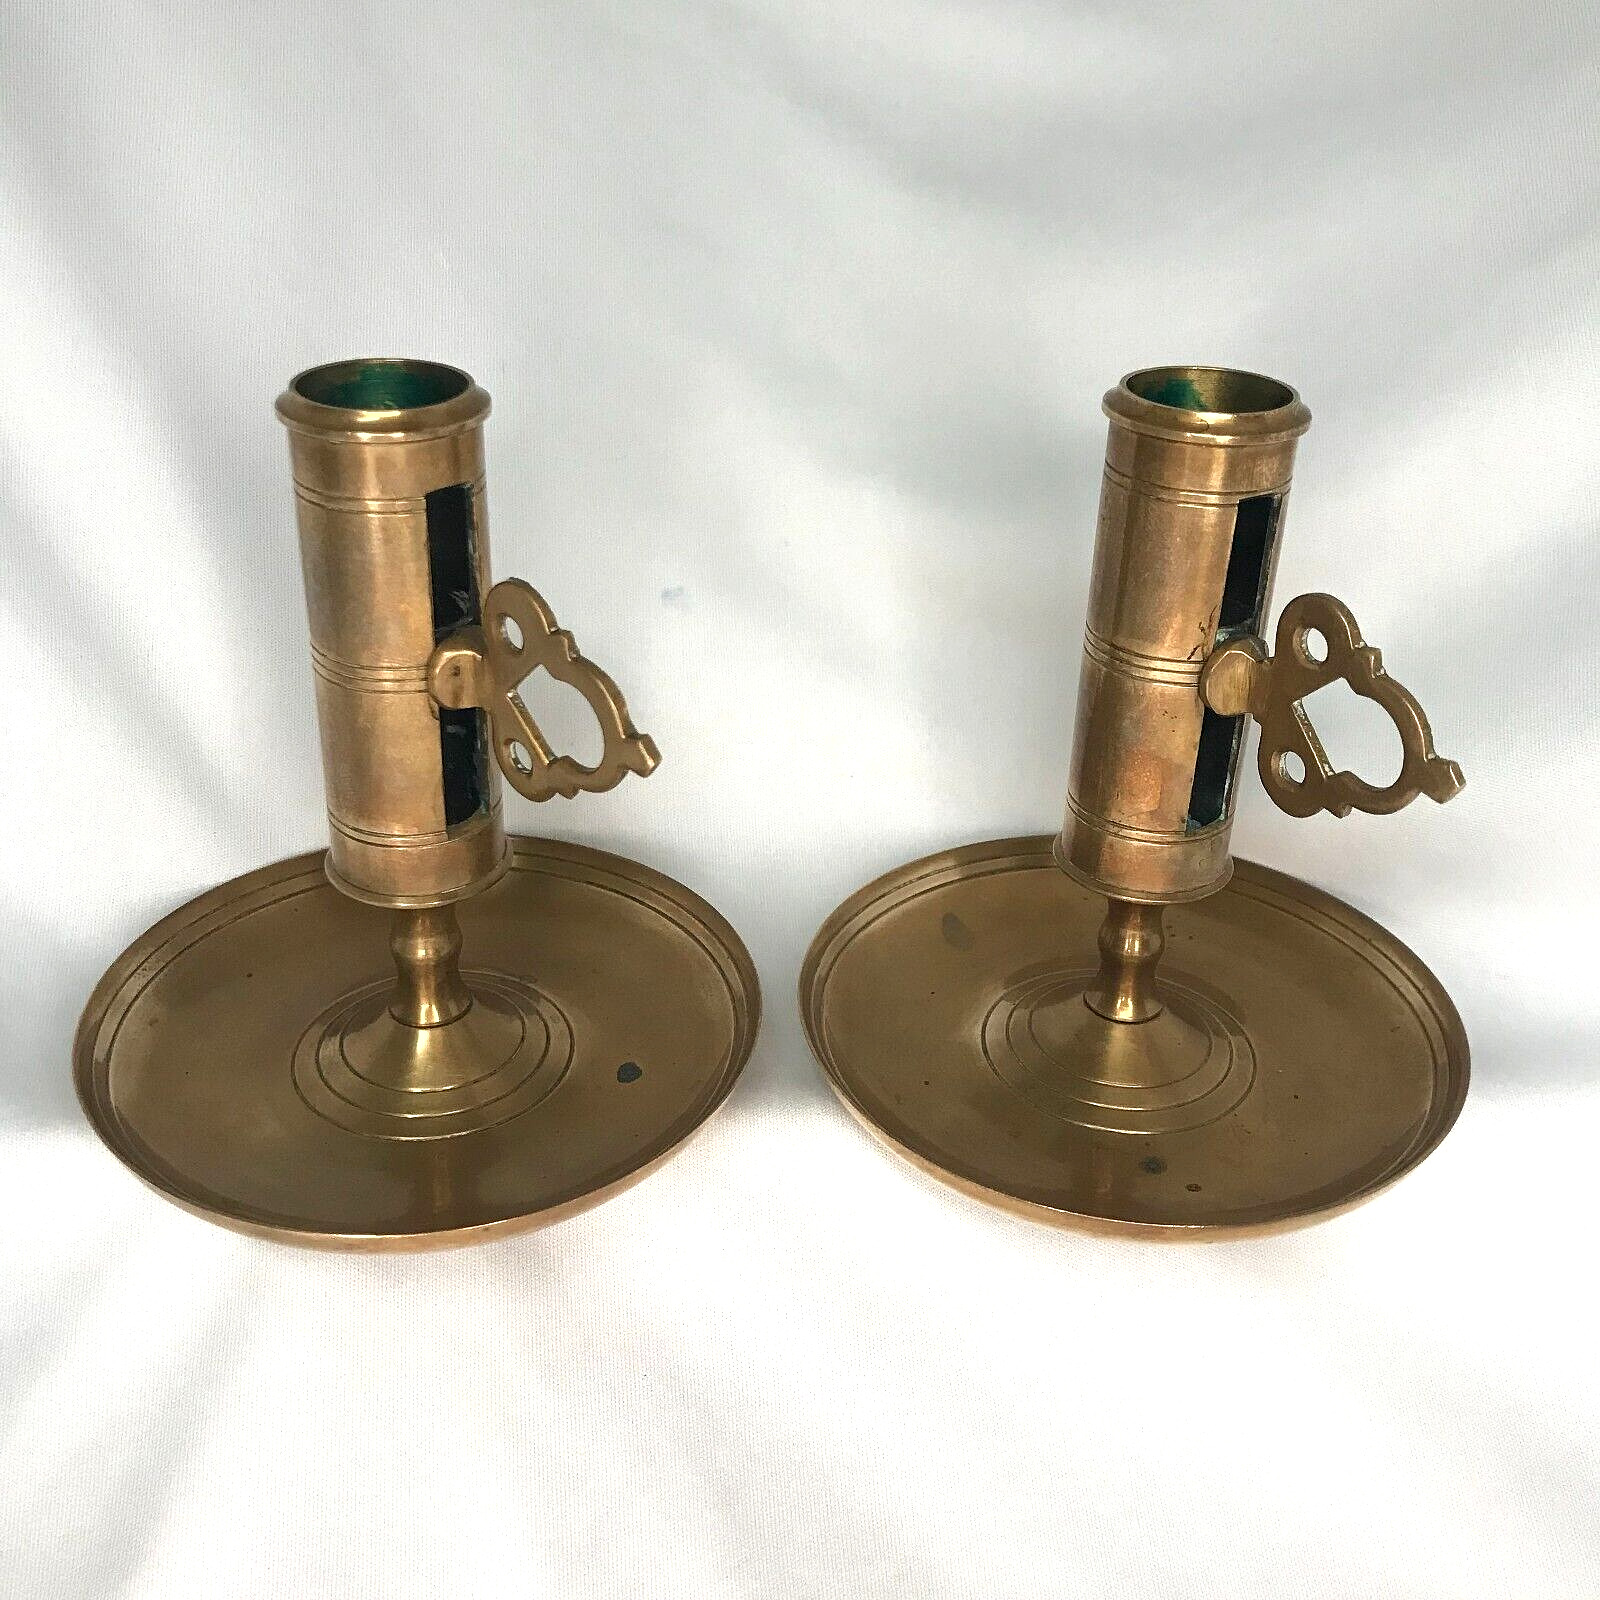 2 Vintage MALM Brass Turn Key Adjustable Candlestick Holders With Drip Pans